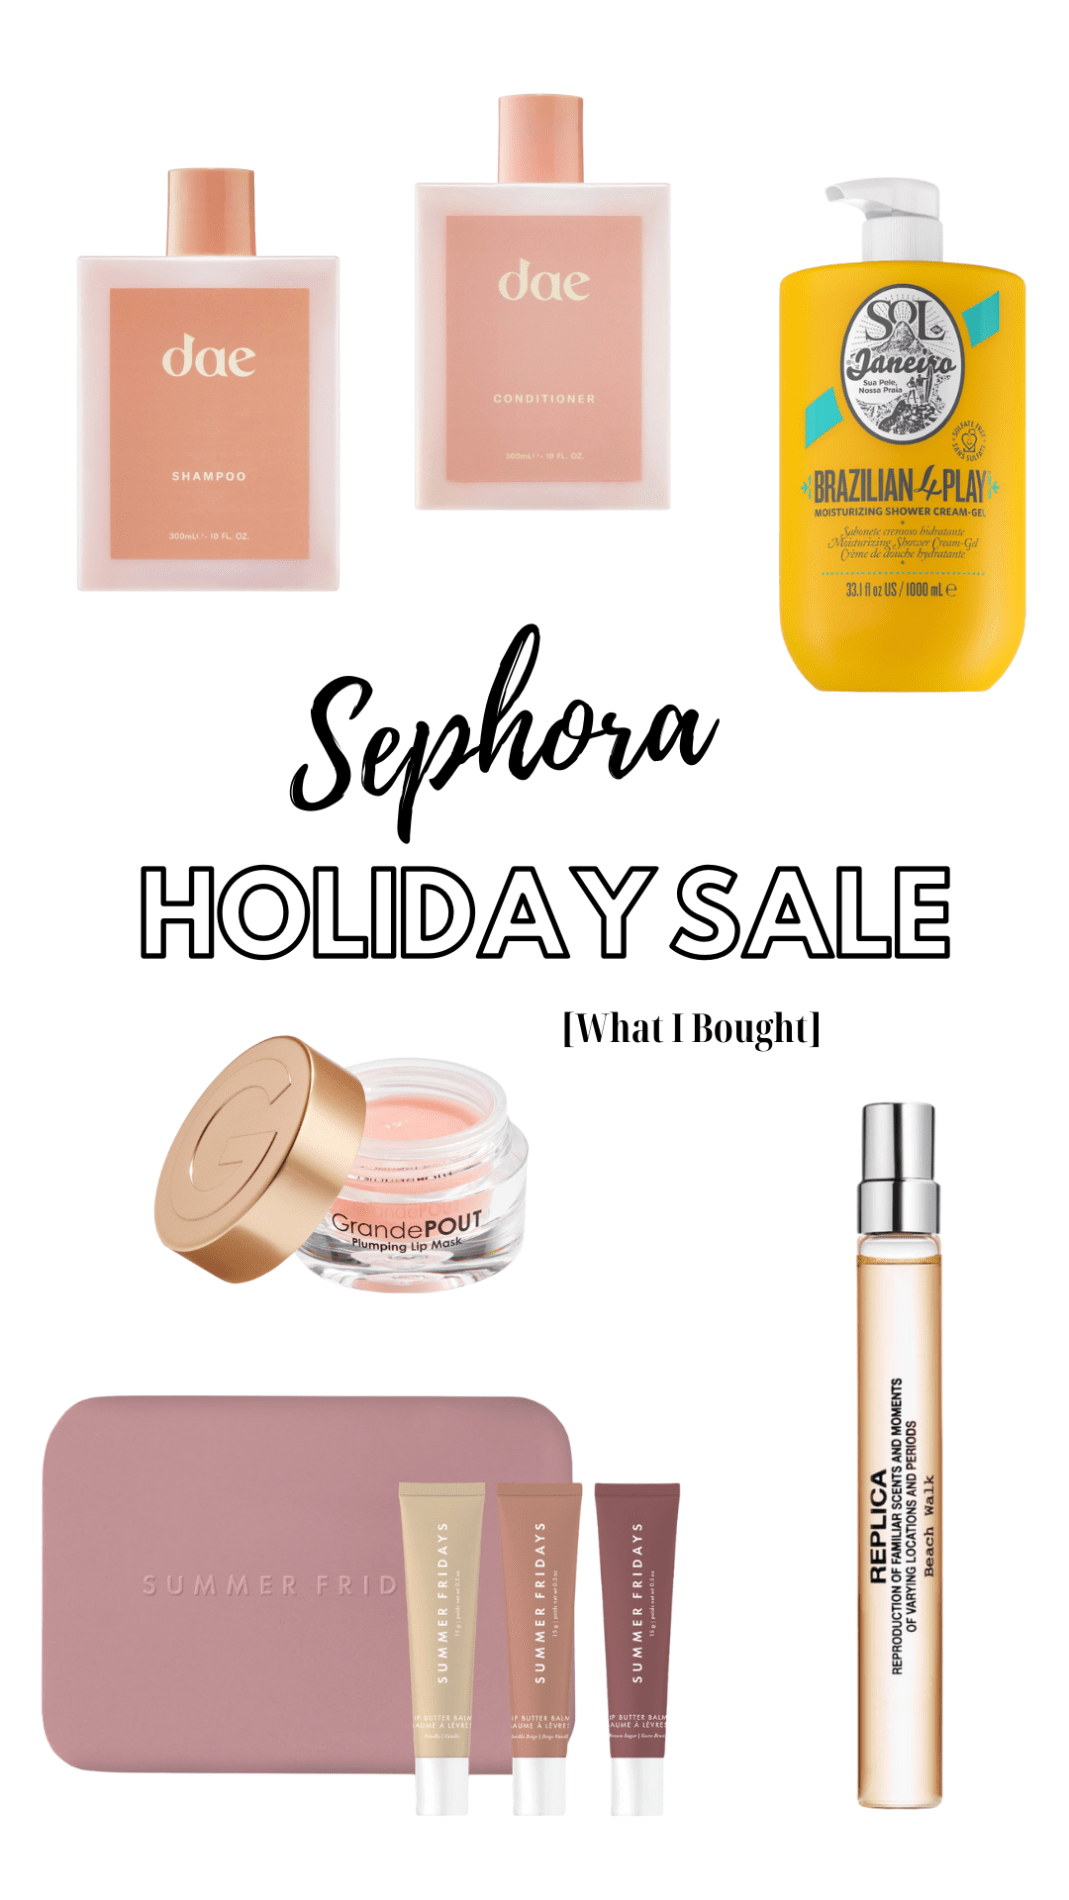 Sephora Holiday Savings Event – Last Call + What I Bought!